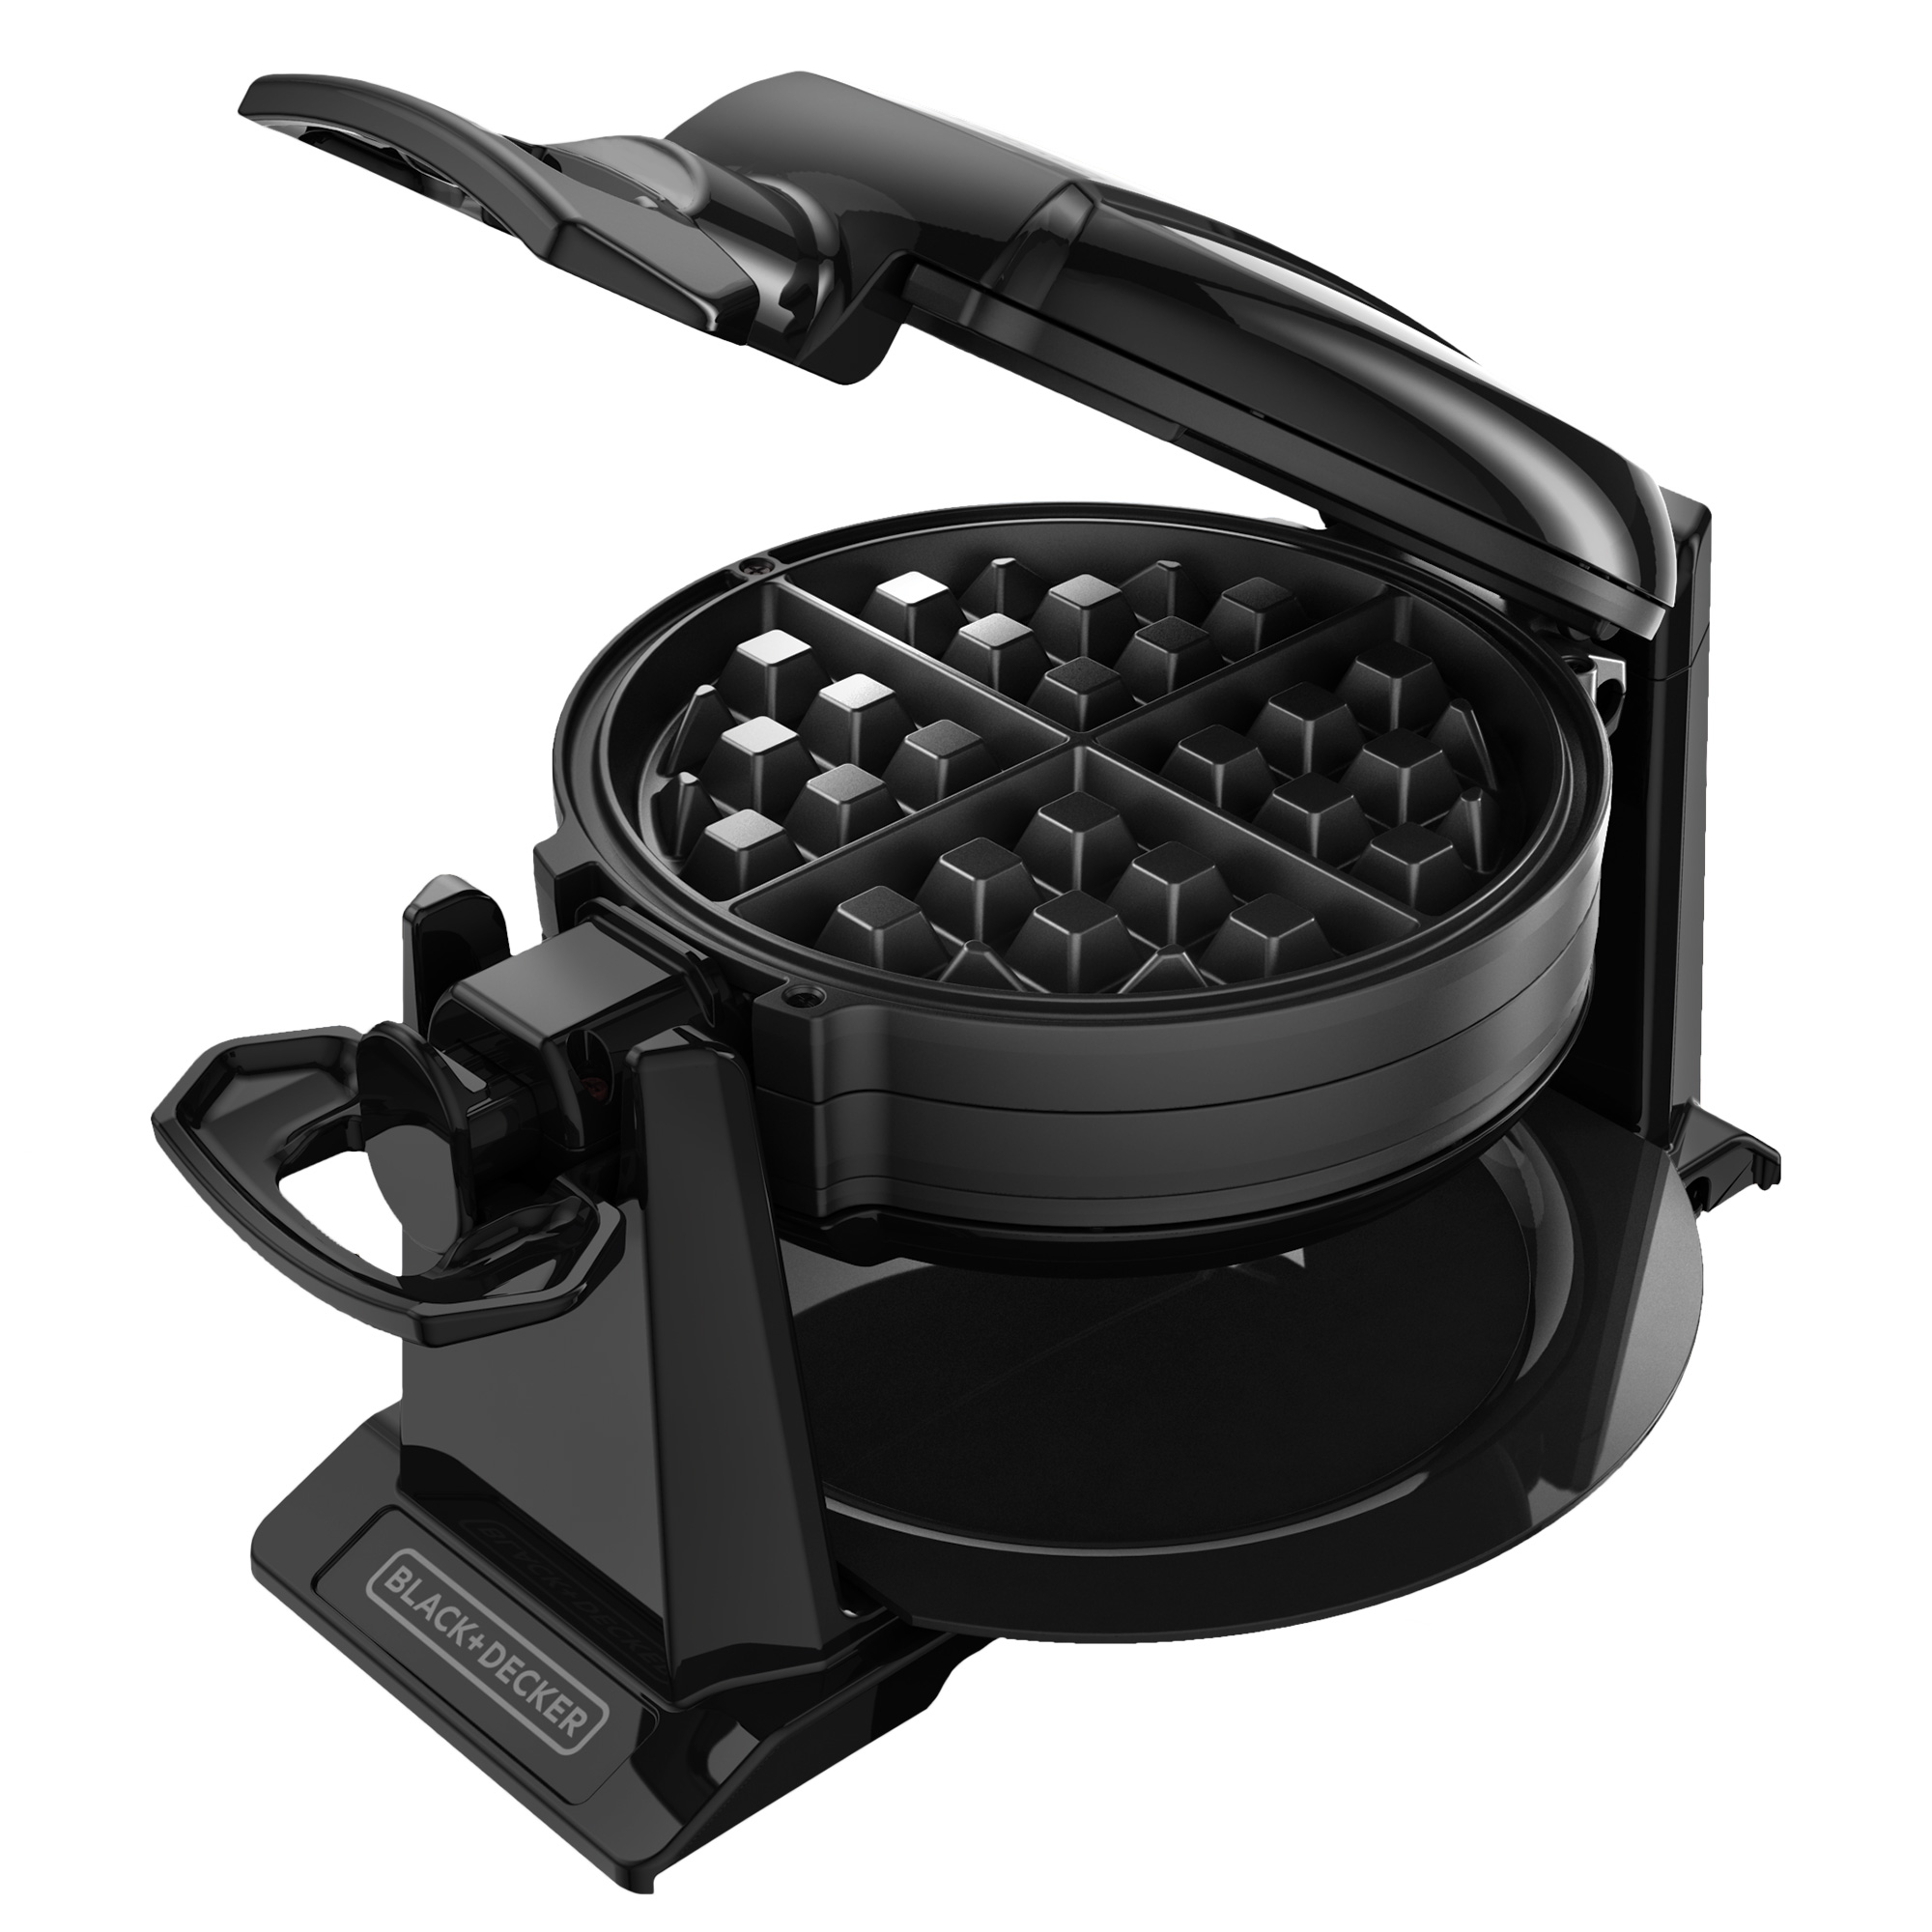 Buy the 2 Serving Multi-Plate Waffle Maker, WG1041WC